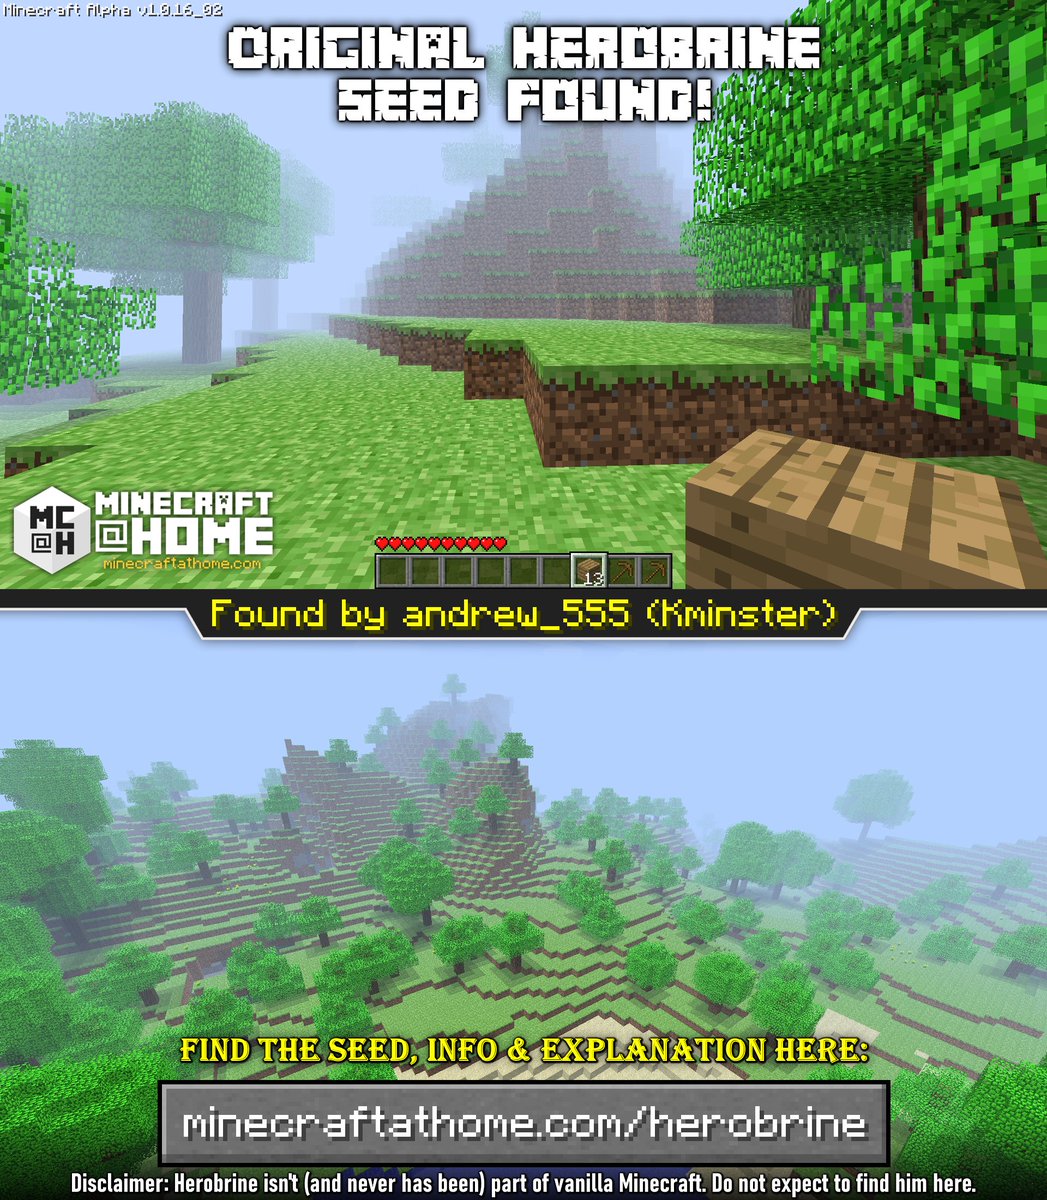 Antvenom The Original Minecraft Herobrine World Seed Has Been Found Huge Congrats To The Minecraftathome Team Will Have A Video Up About It Tomorrow At 12pm Et T Co Zqpyvyeh0r